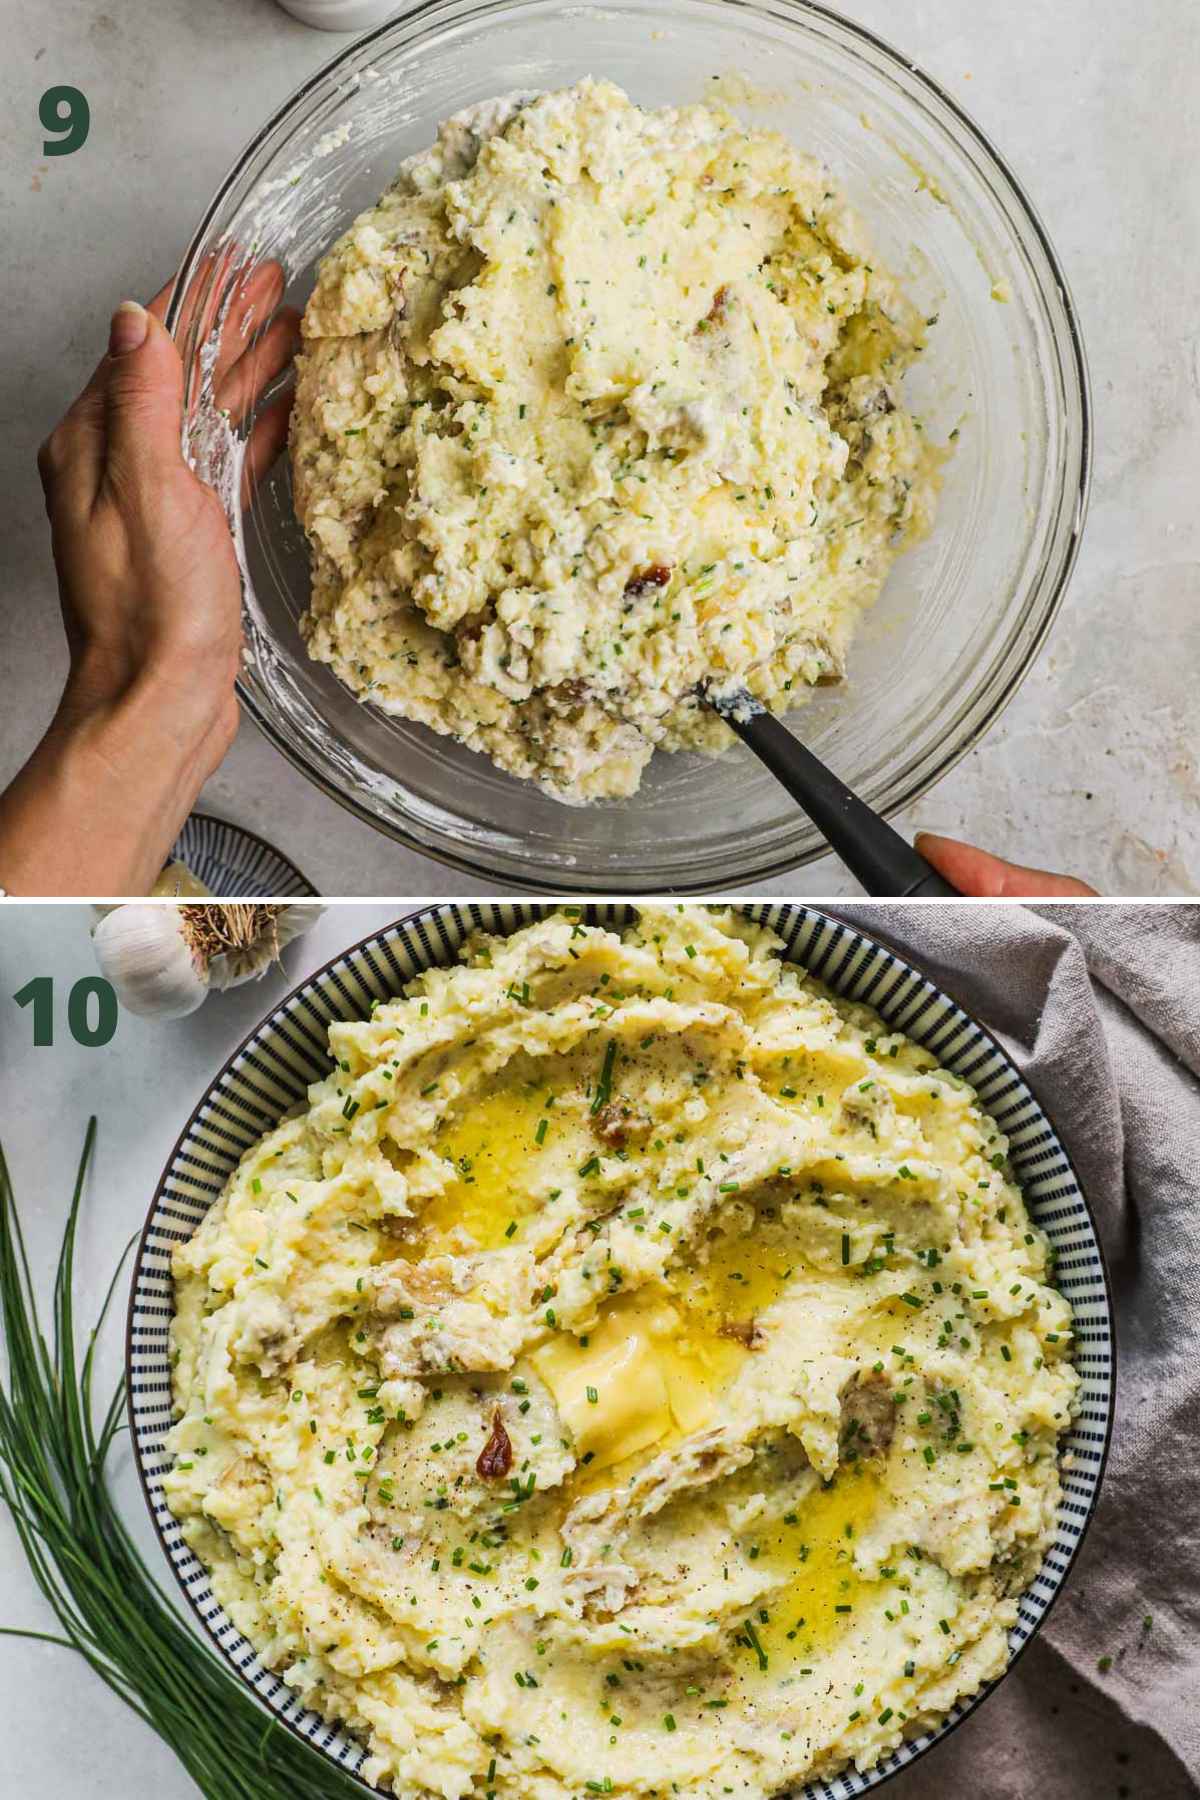 Steps to make roasted garlic mashed potatoes, mix riced yukon potatoes with sour cream, roasted garlic, parmigiano-reggiano, chives, salt, pepper, heavy cream, butter.